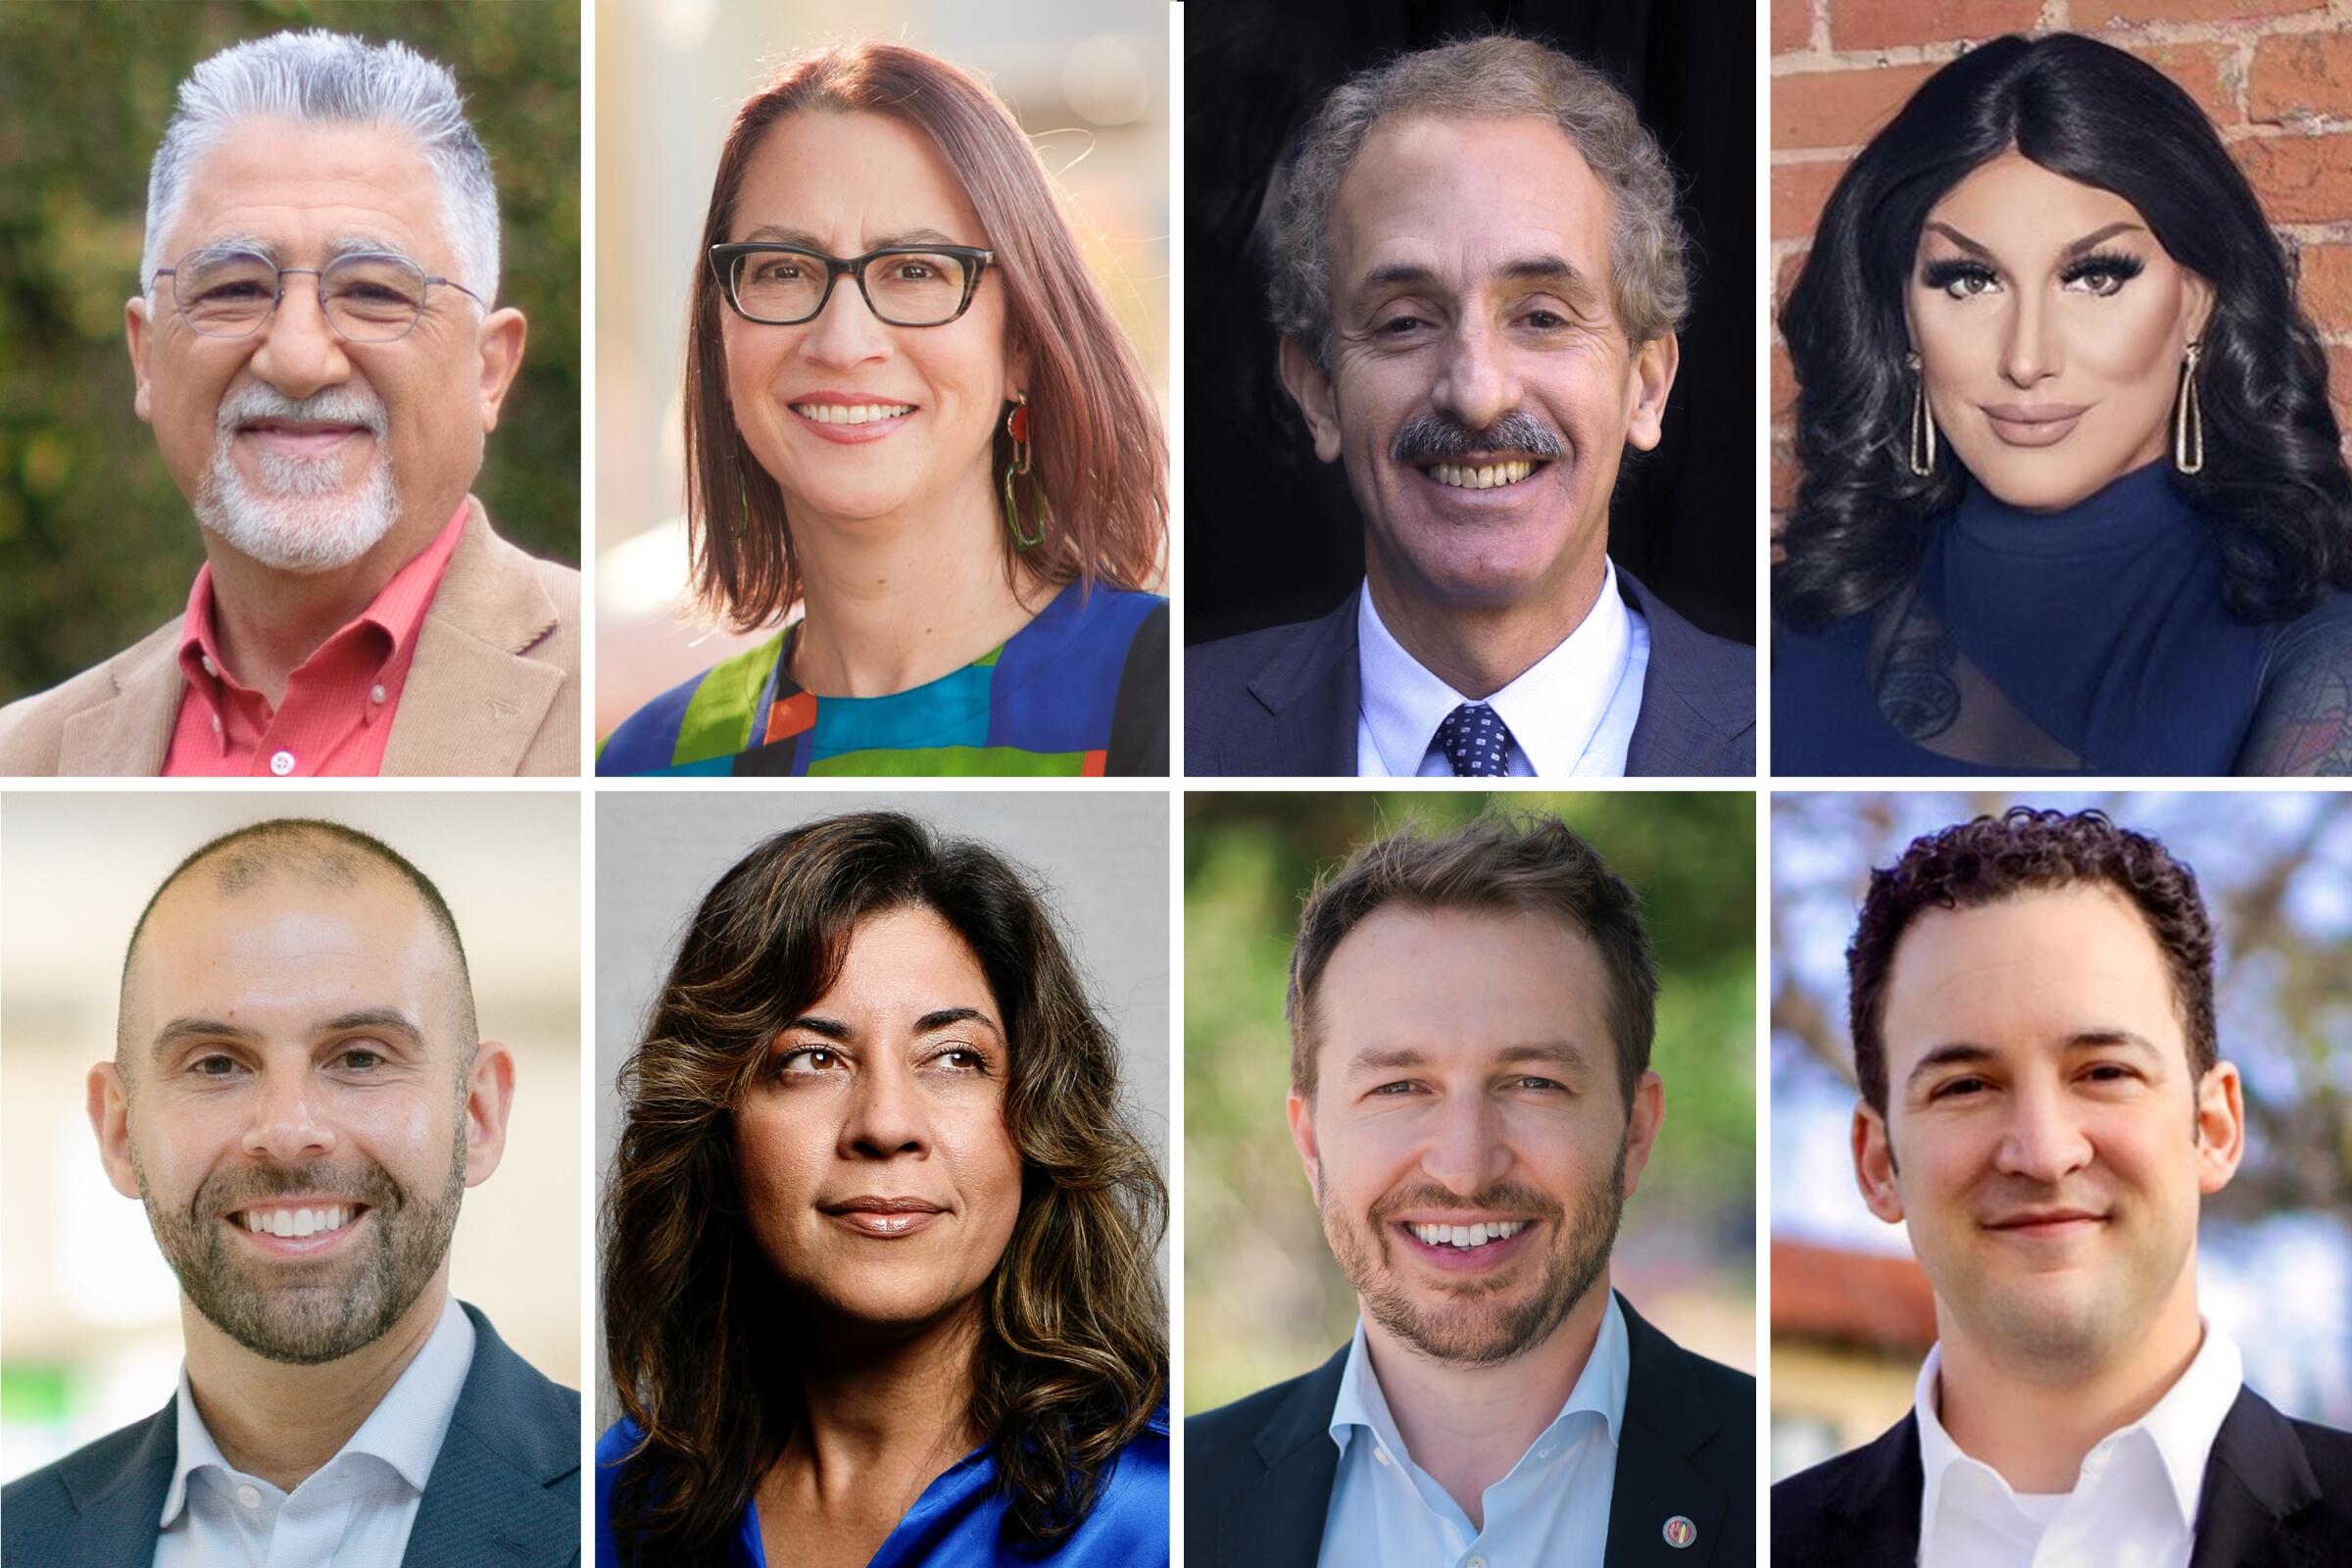 Photos of 8 candidates in the 30th Congressional District 